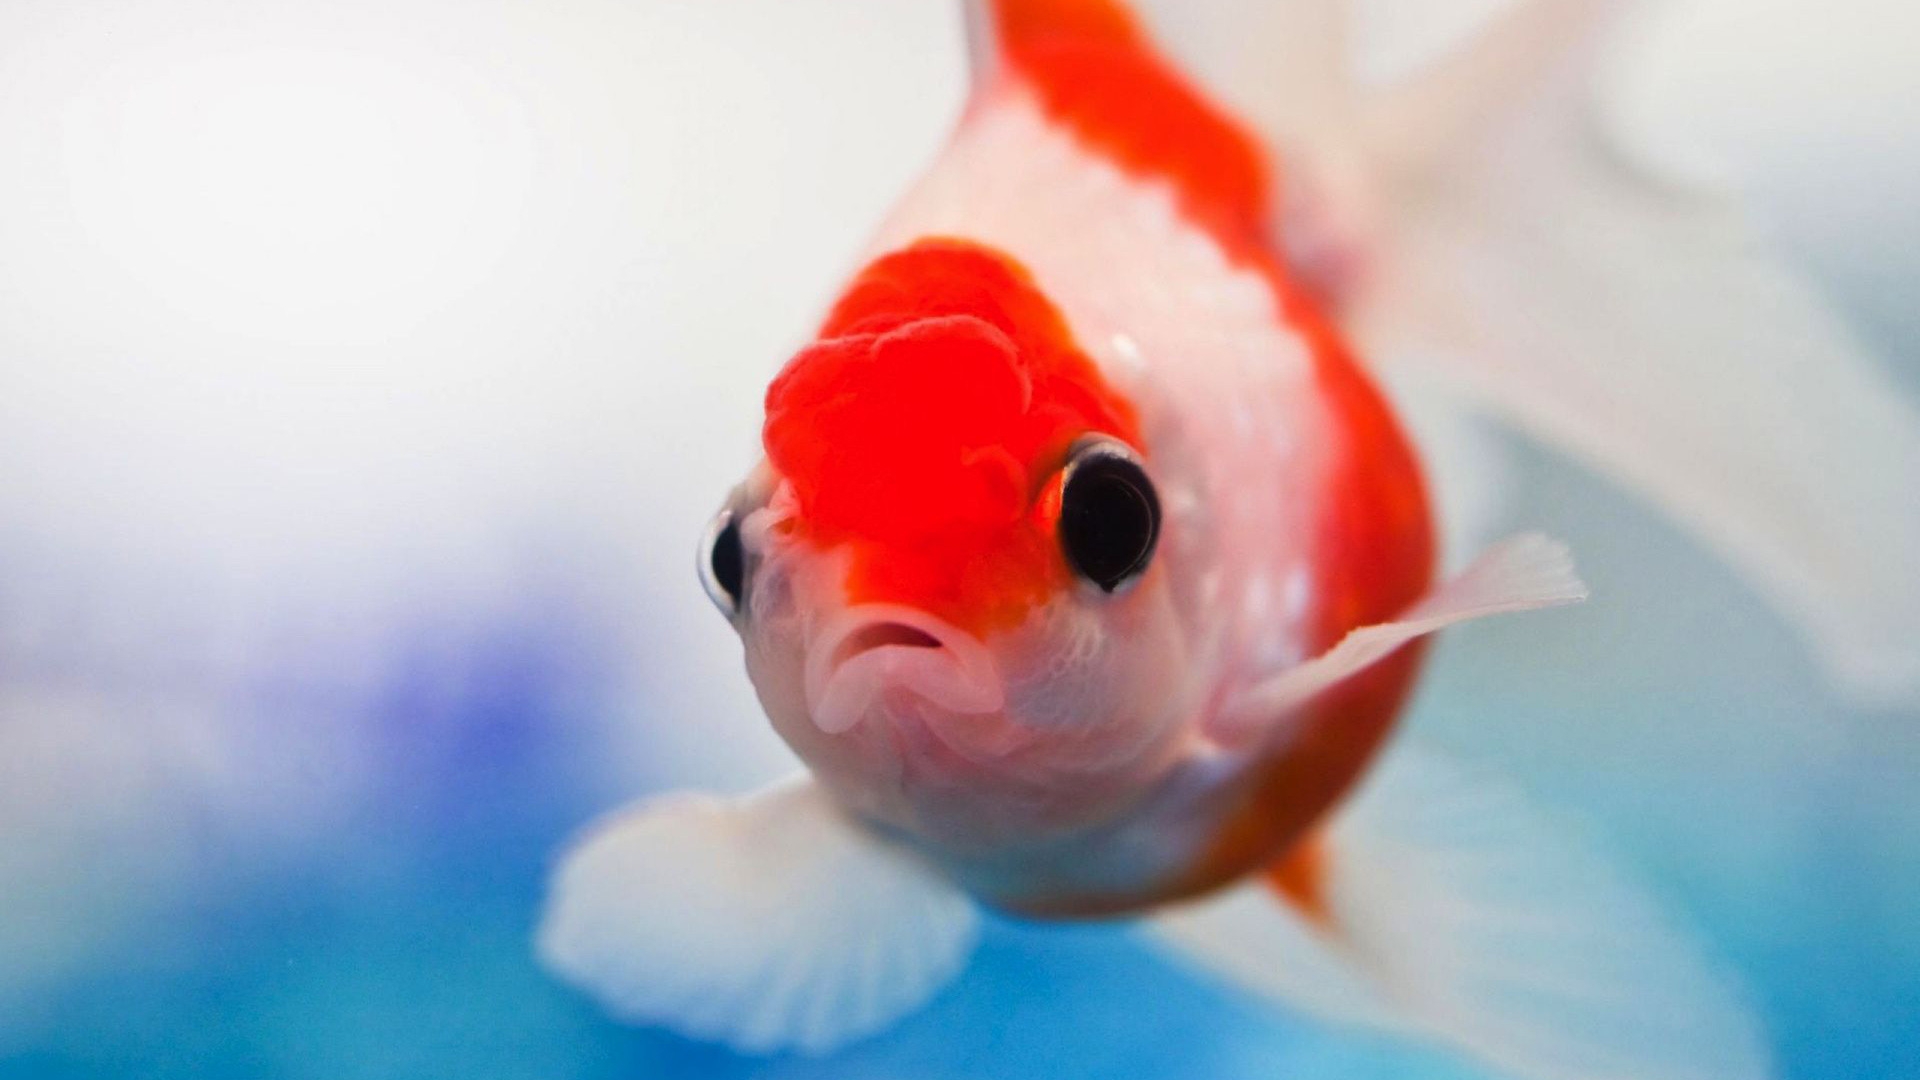 Red and White Small Fish for 1920 x 1080 HDTV 1080p resolution